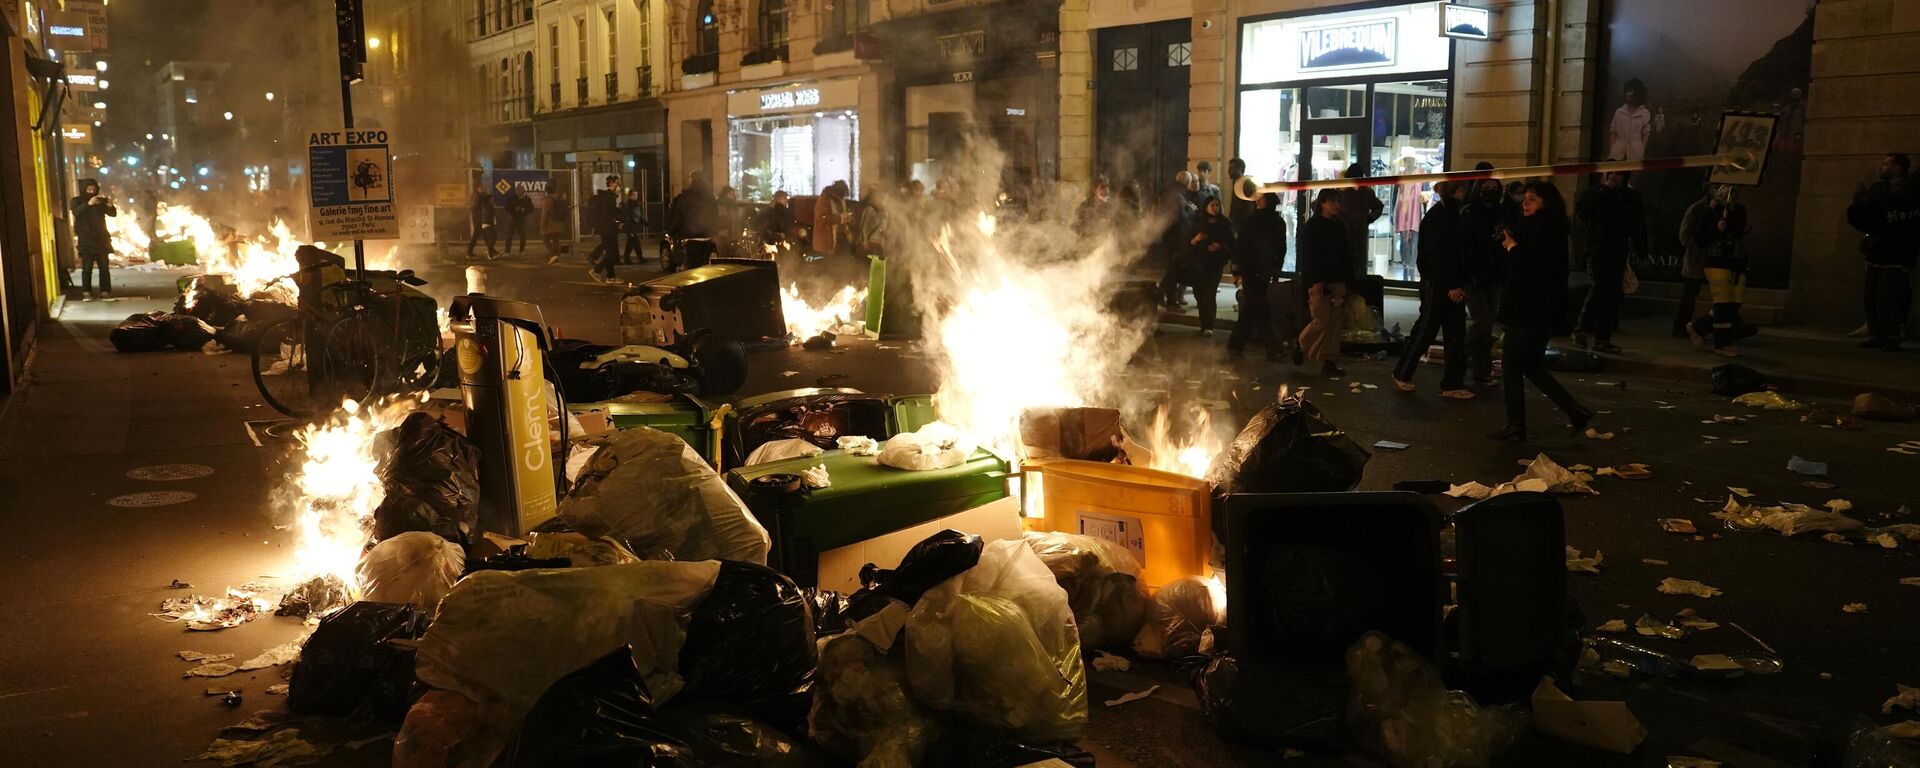 Garbage is set on fire by protesters after a demonstration near Concorde square, in Paris, Thursday, March 16, 2023. French President Emmanuel Macron has shunned parliament and imposed a highly unpopular change to the nation's pension system, raising the retirement age from 62 to 64. - Sputnik International, 1920, 18.03.2023